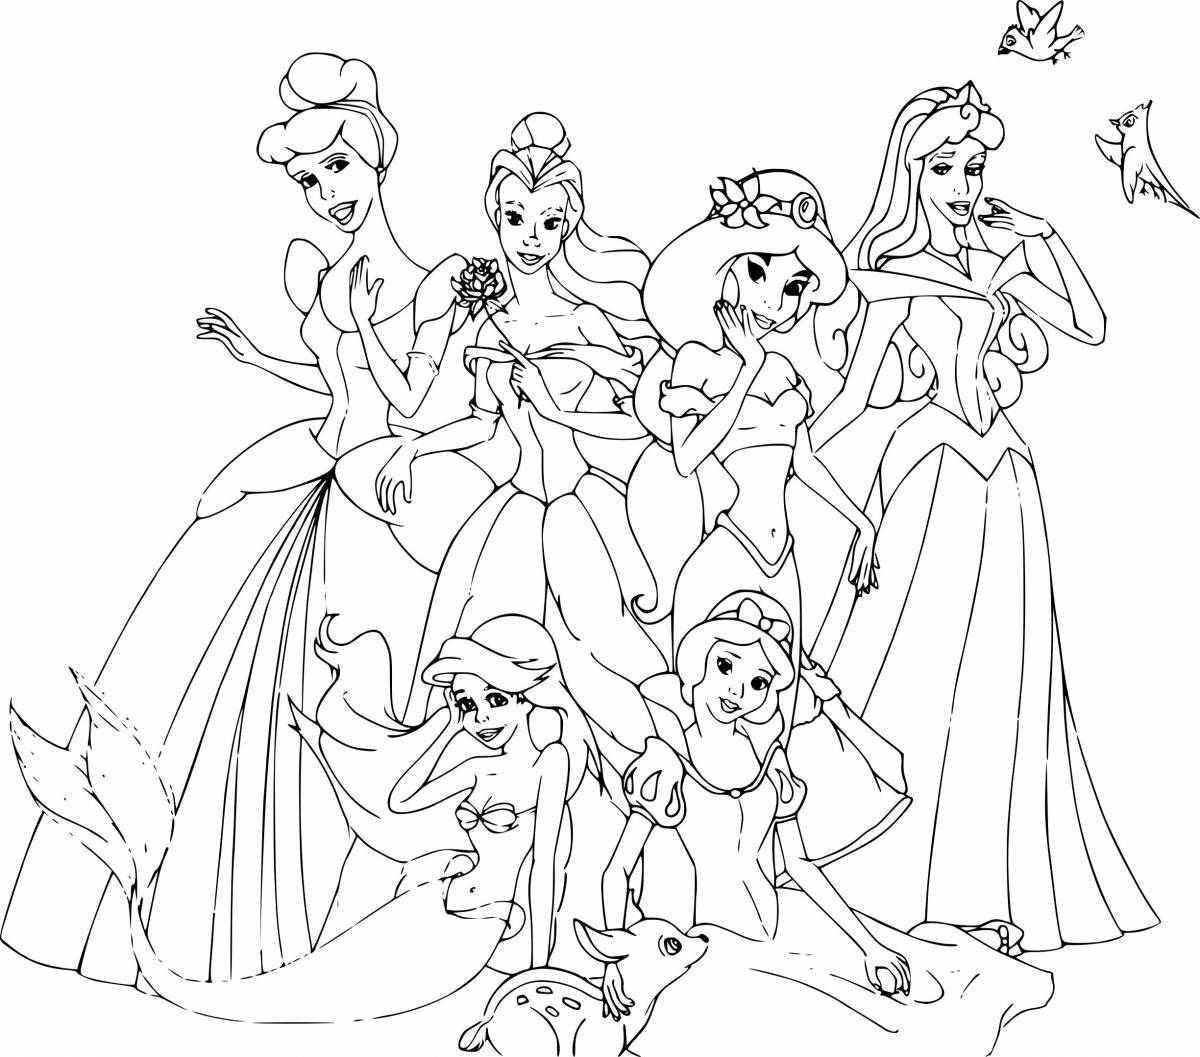 Coloring book for kids with disney princesses